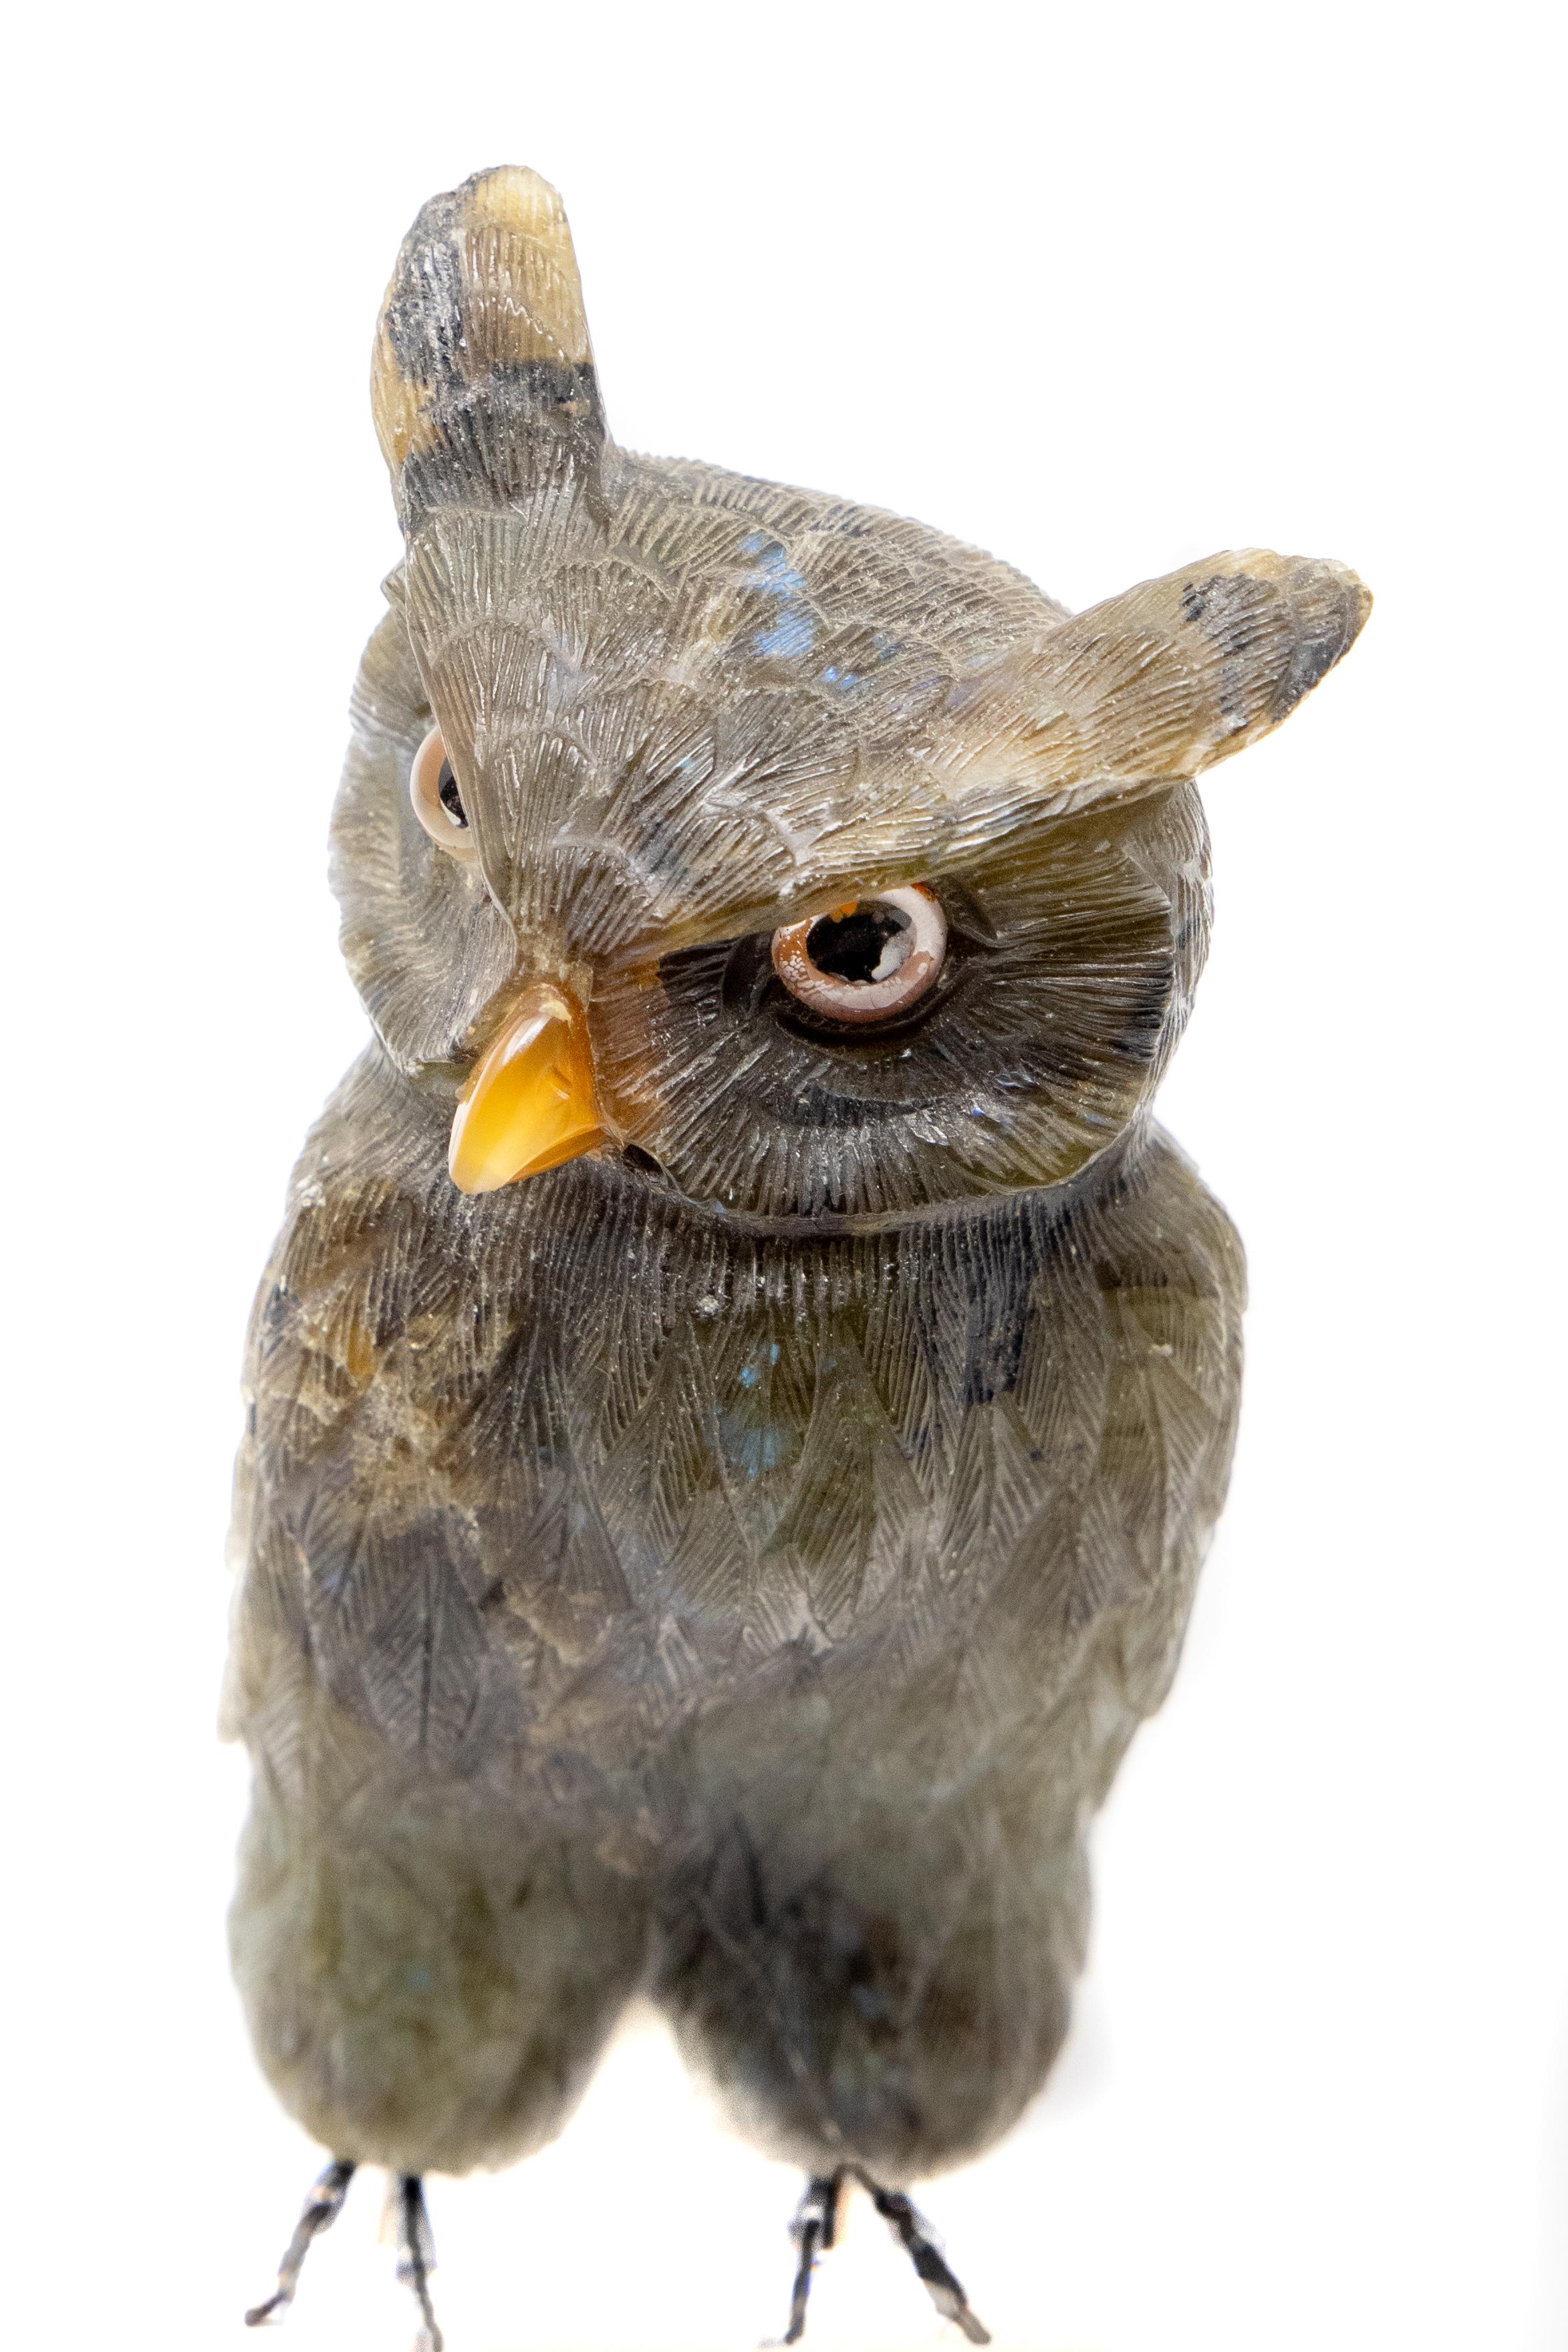 This gorgeous owl is carved of natural stone. Having intricate detail in the feathers. The stone has natural iridescent spots that turn different colors depending on lighting. Has spikes on the bottom so he could be attached to wood or set in stone.